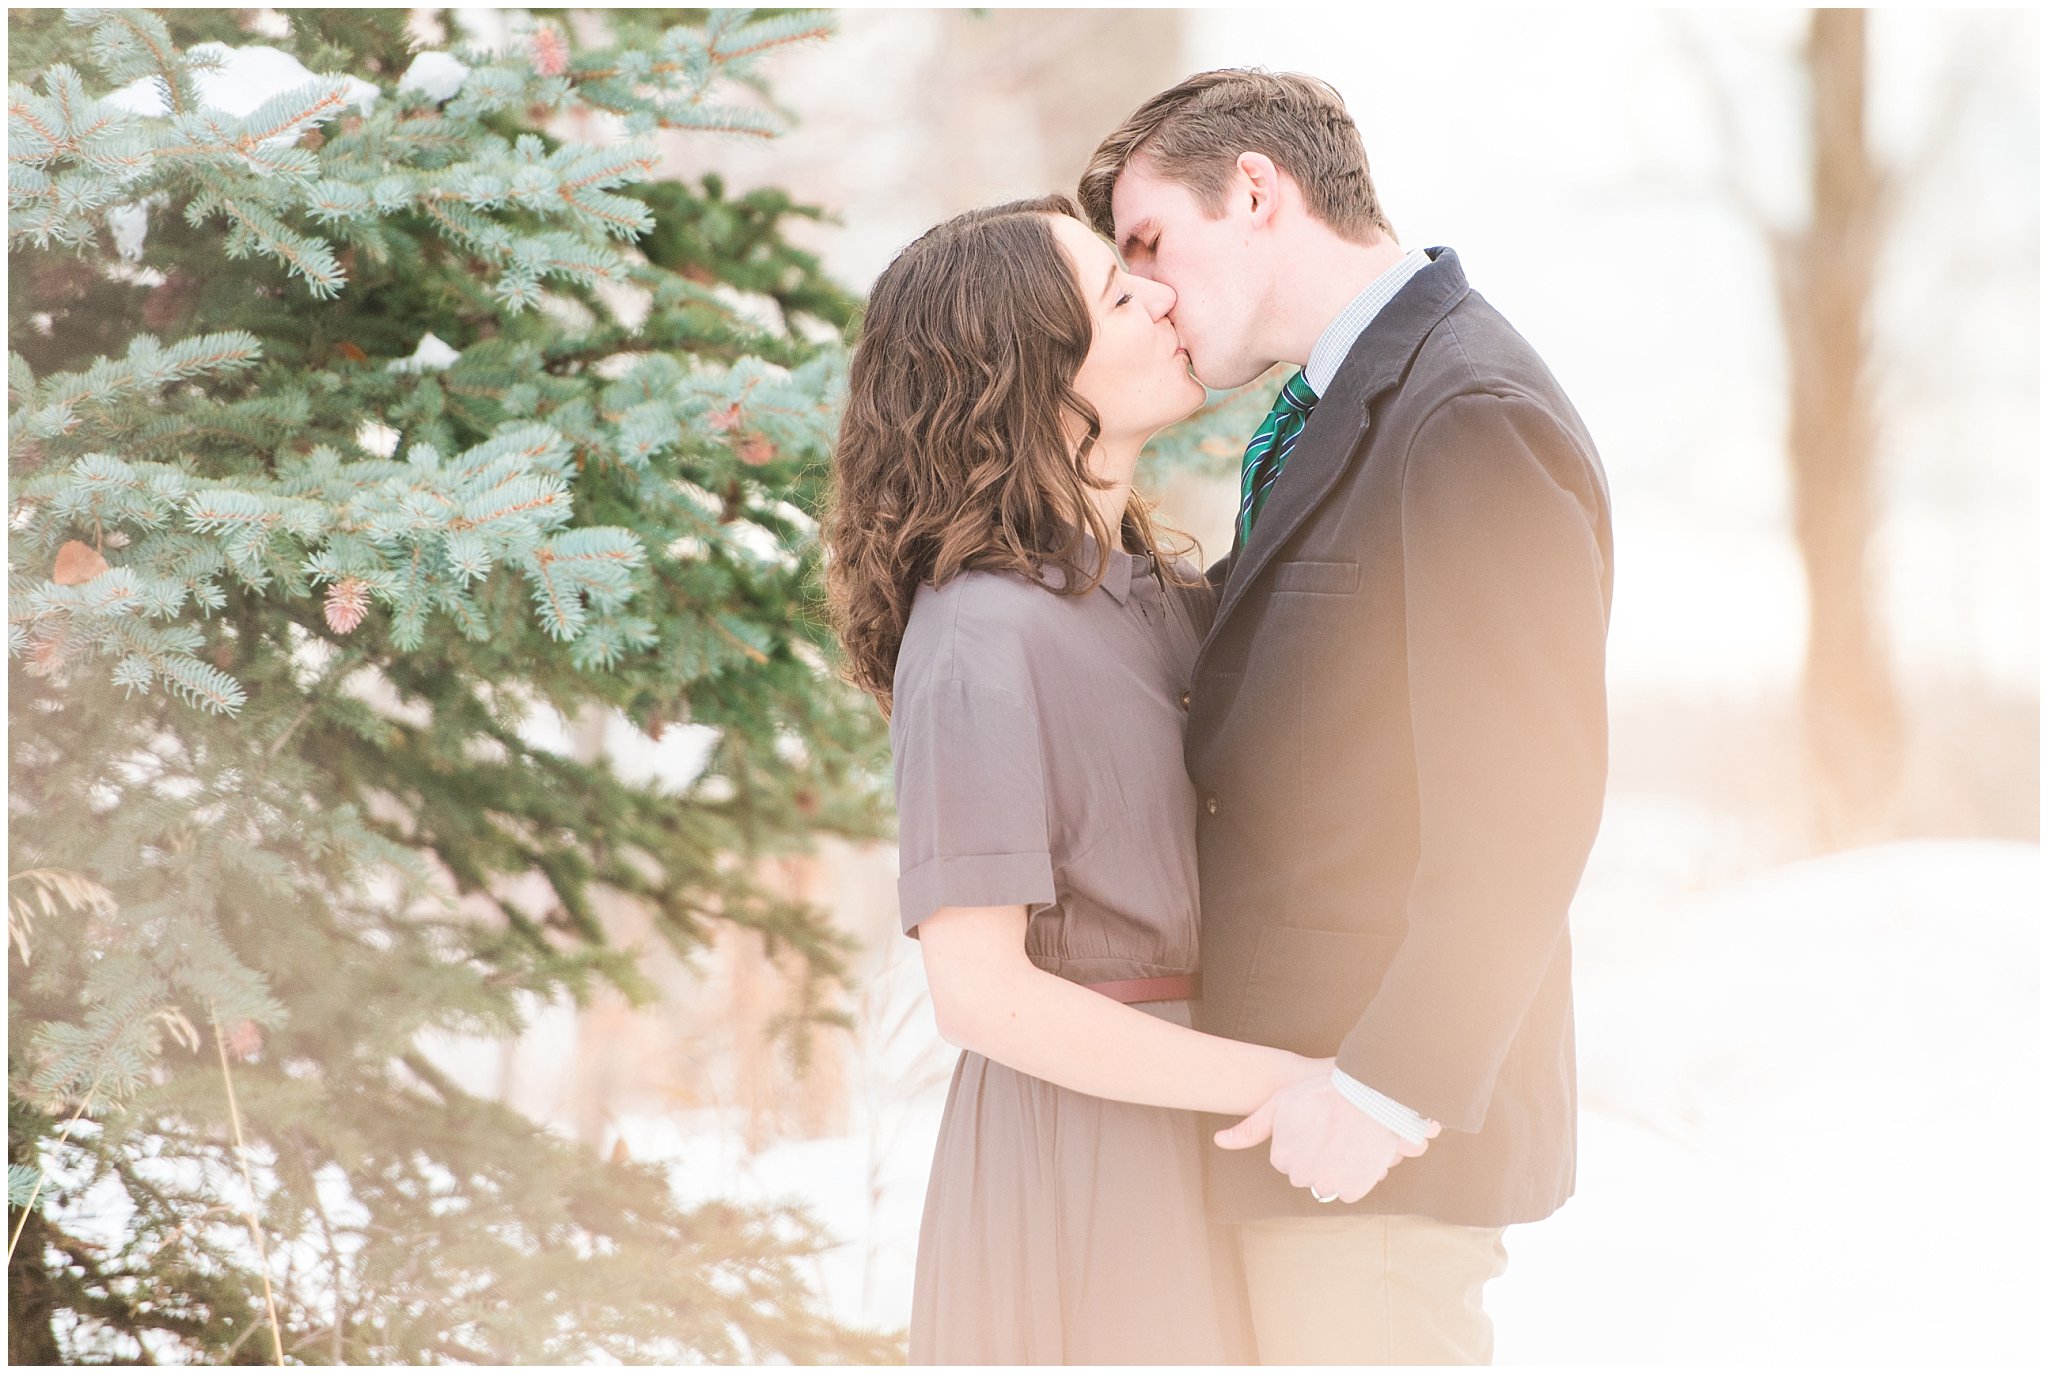 Snowy engagement session with pine trees and couple dressed up in grey dress and navy sport coat in the mountains | Snowbasin Winter Engagement Session